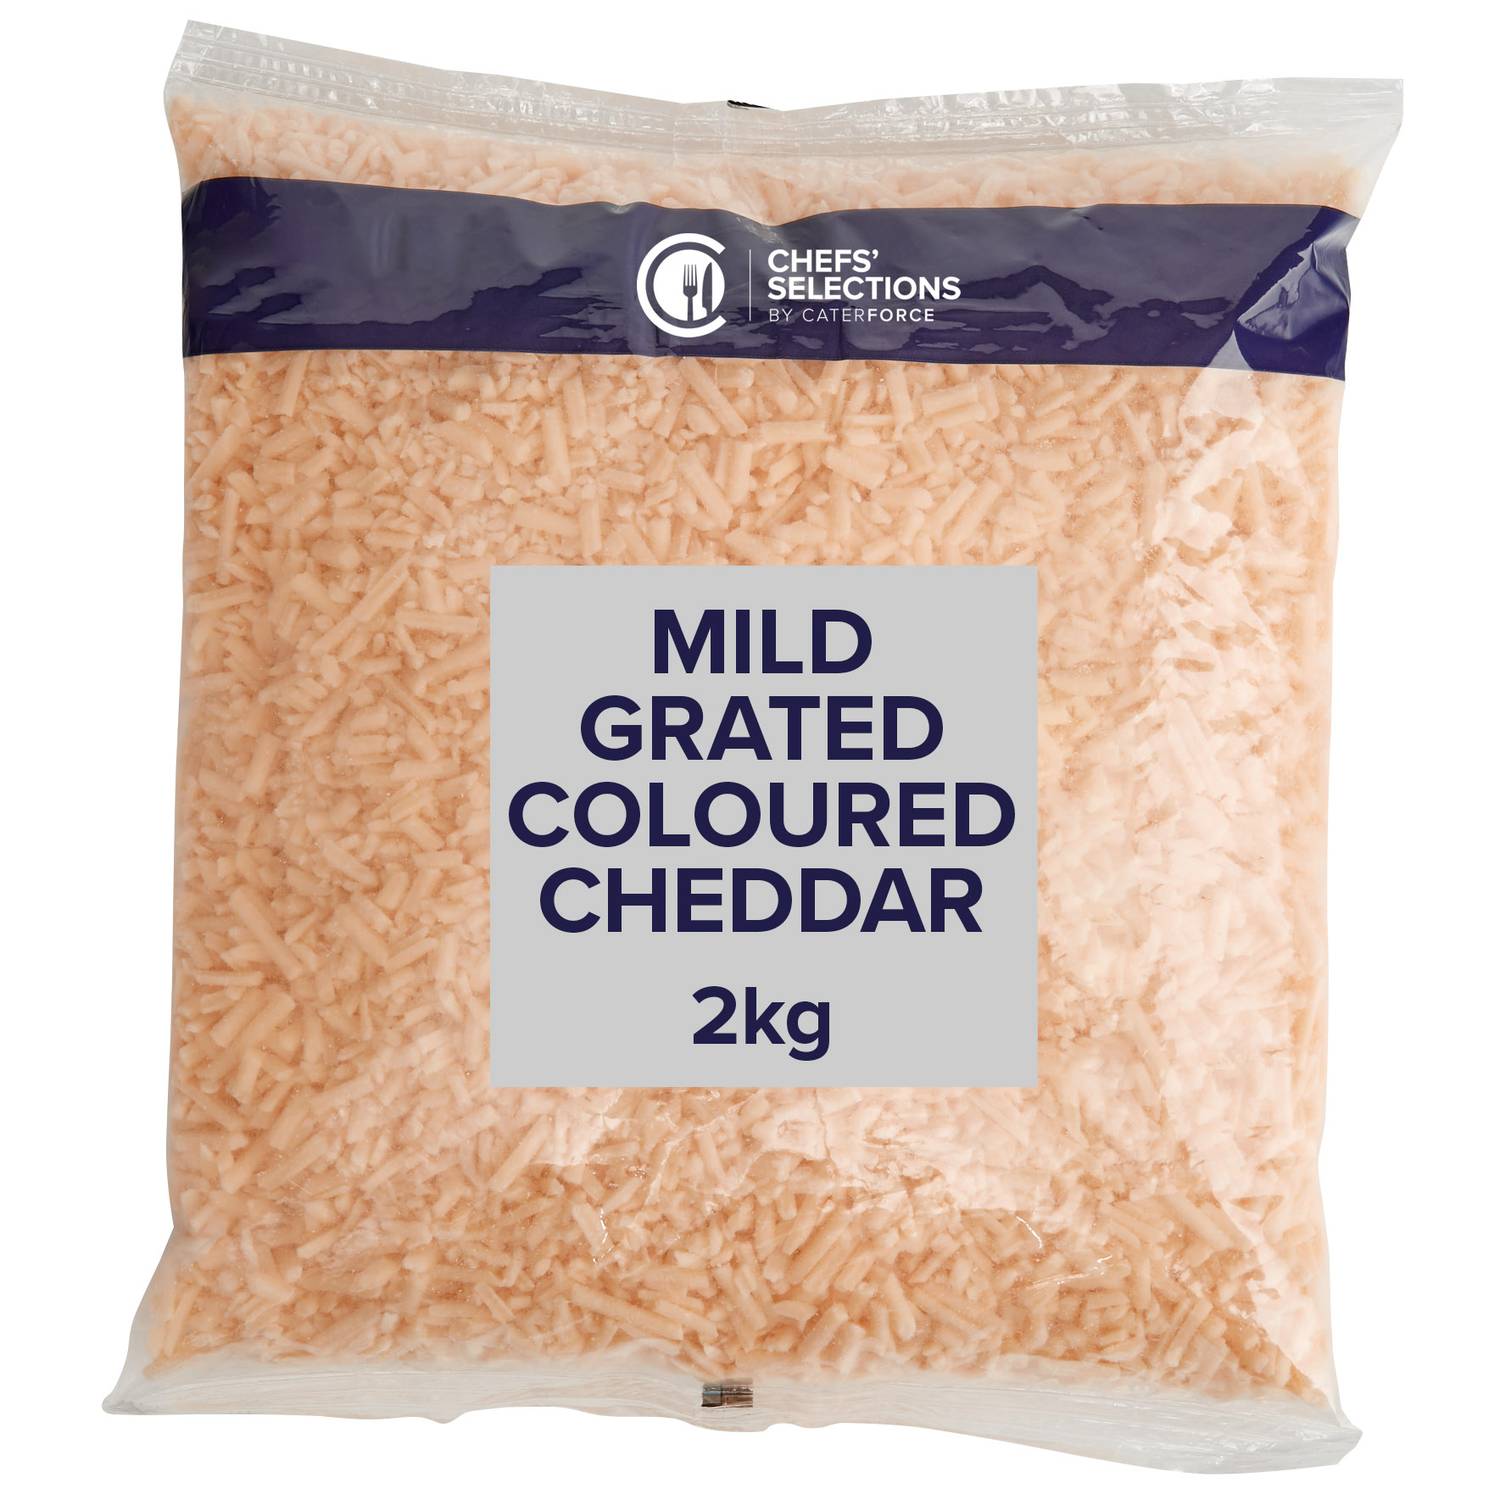 Chefs’ Selections Grated Coloured Mild Cheddar 6 x 2kg